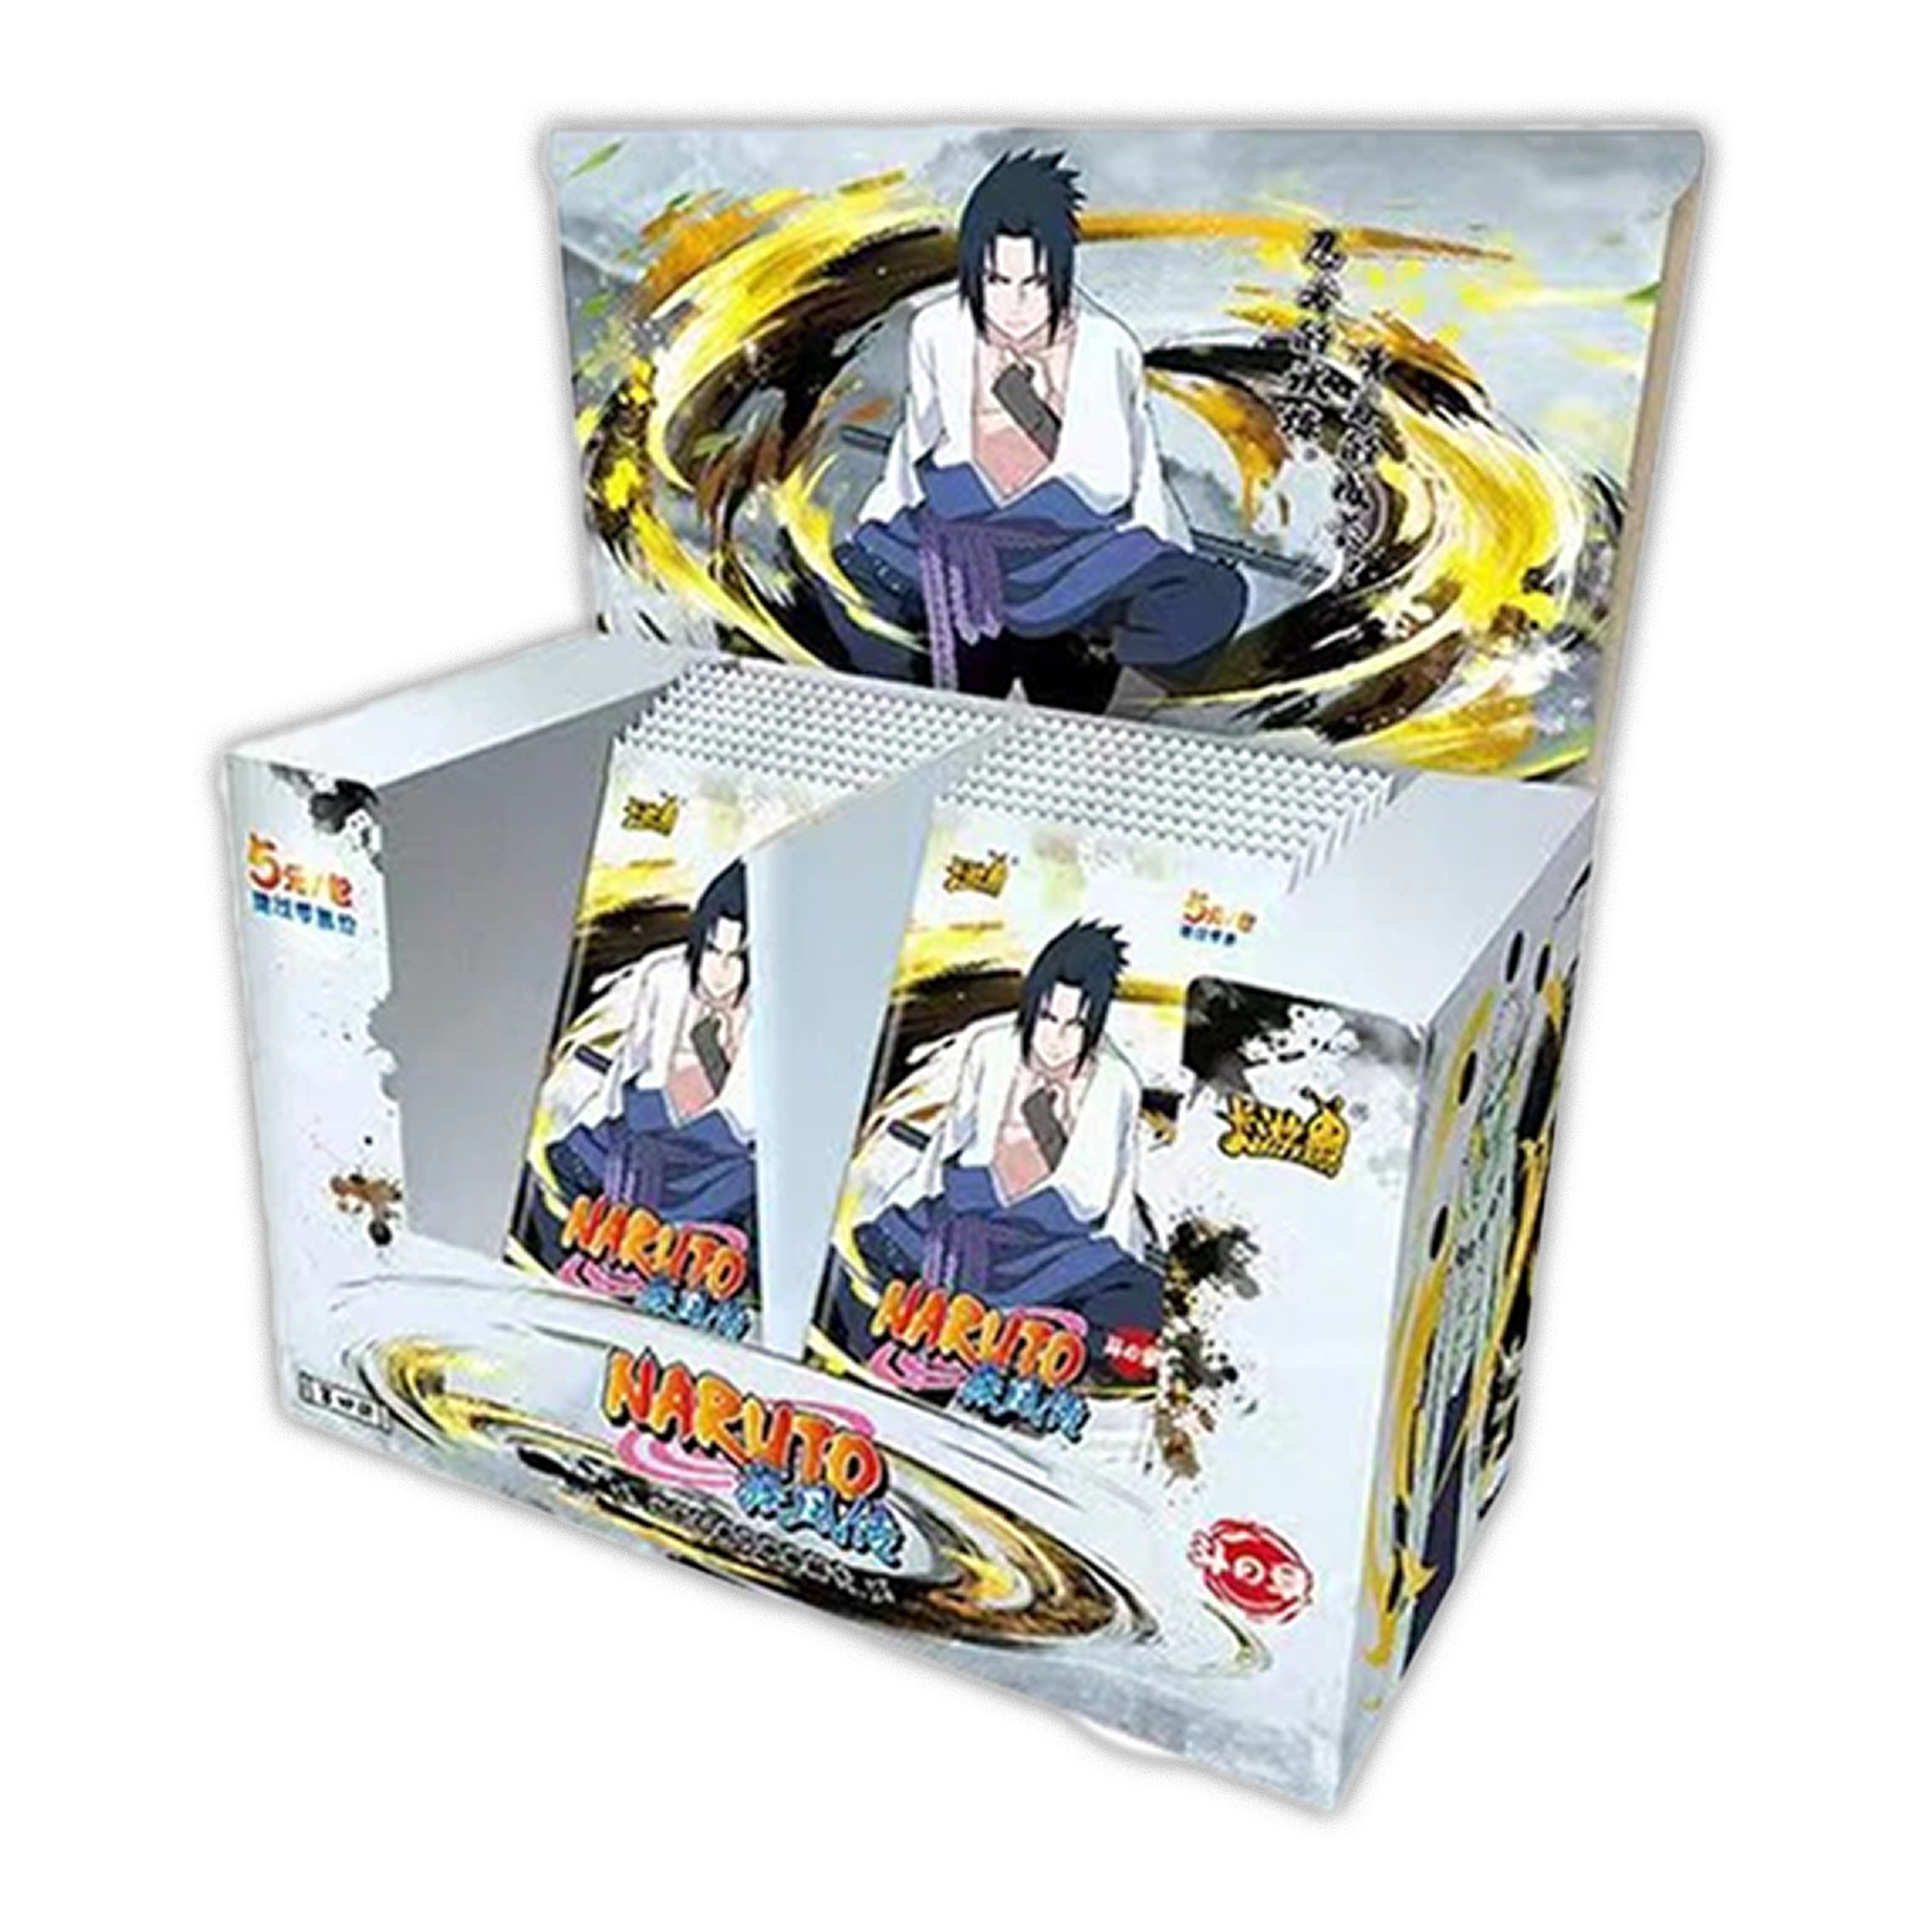 [SCELLE] Display 20 Boosters Naruto Kayou - Wave 4 Tiers 3 [CN]